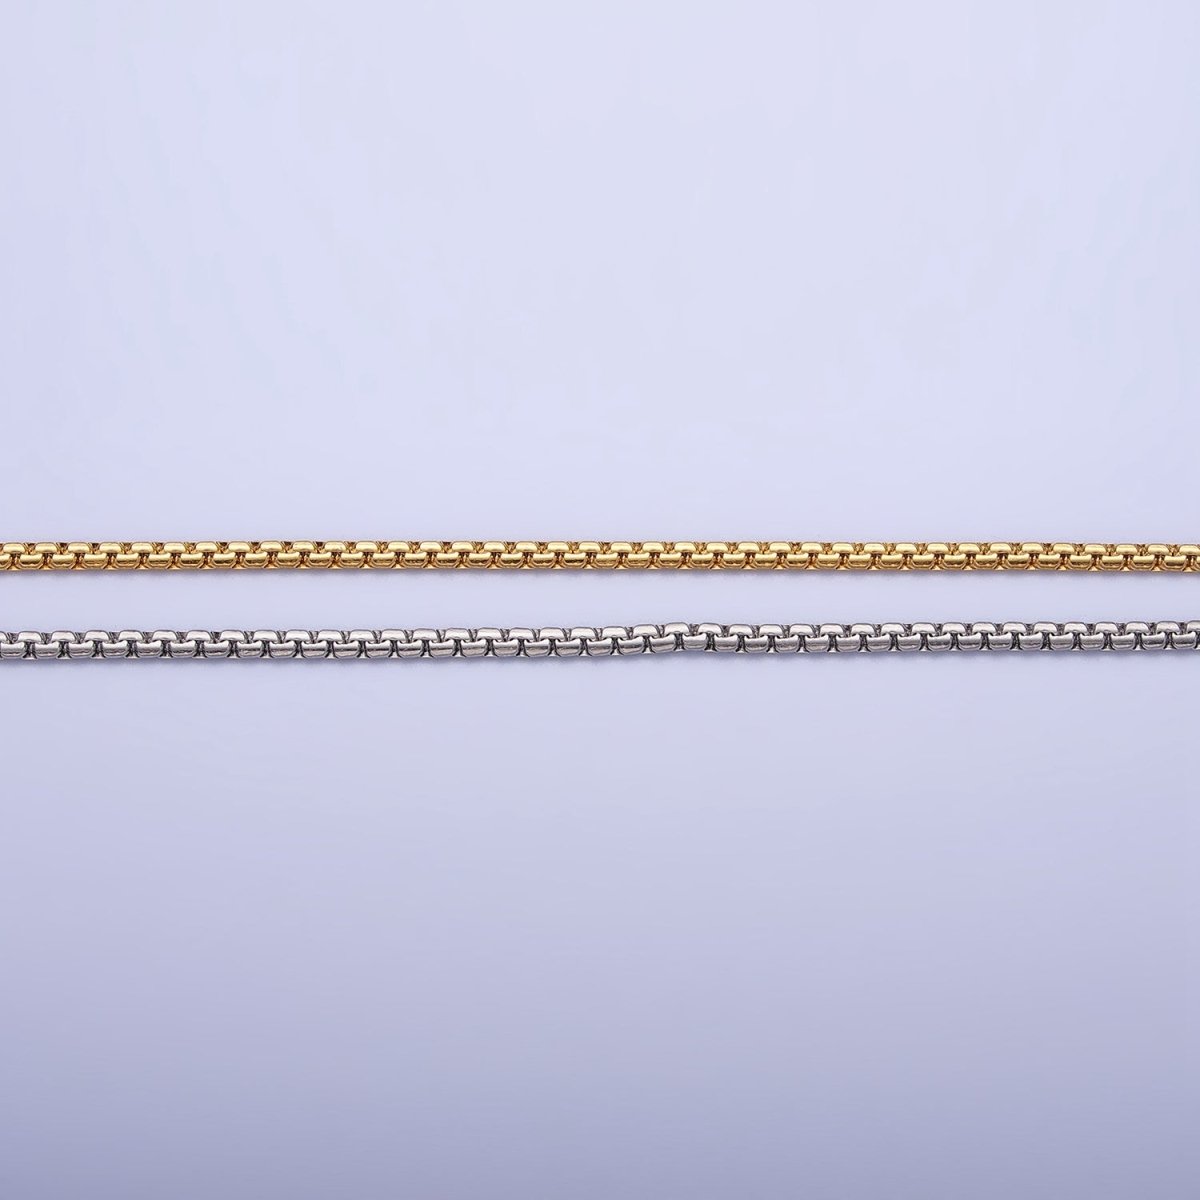 Stainless Steel Box Boston Chain Necklace 2mm Thick Gold Box Chain 17.7 inches, 19.6 inches for Jewelry Making | WA-1700 WA-1705 Clearance Pricing - DLUXCA